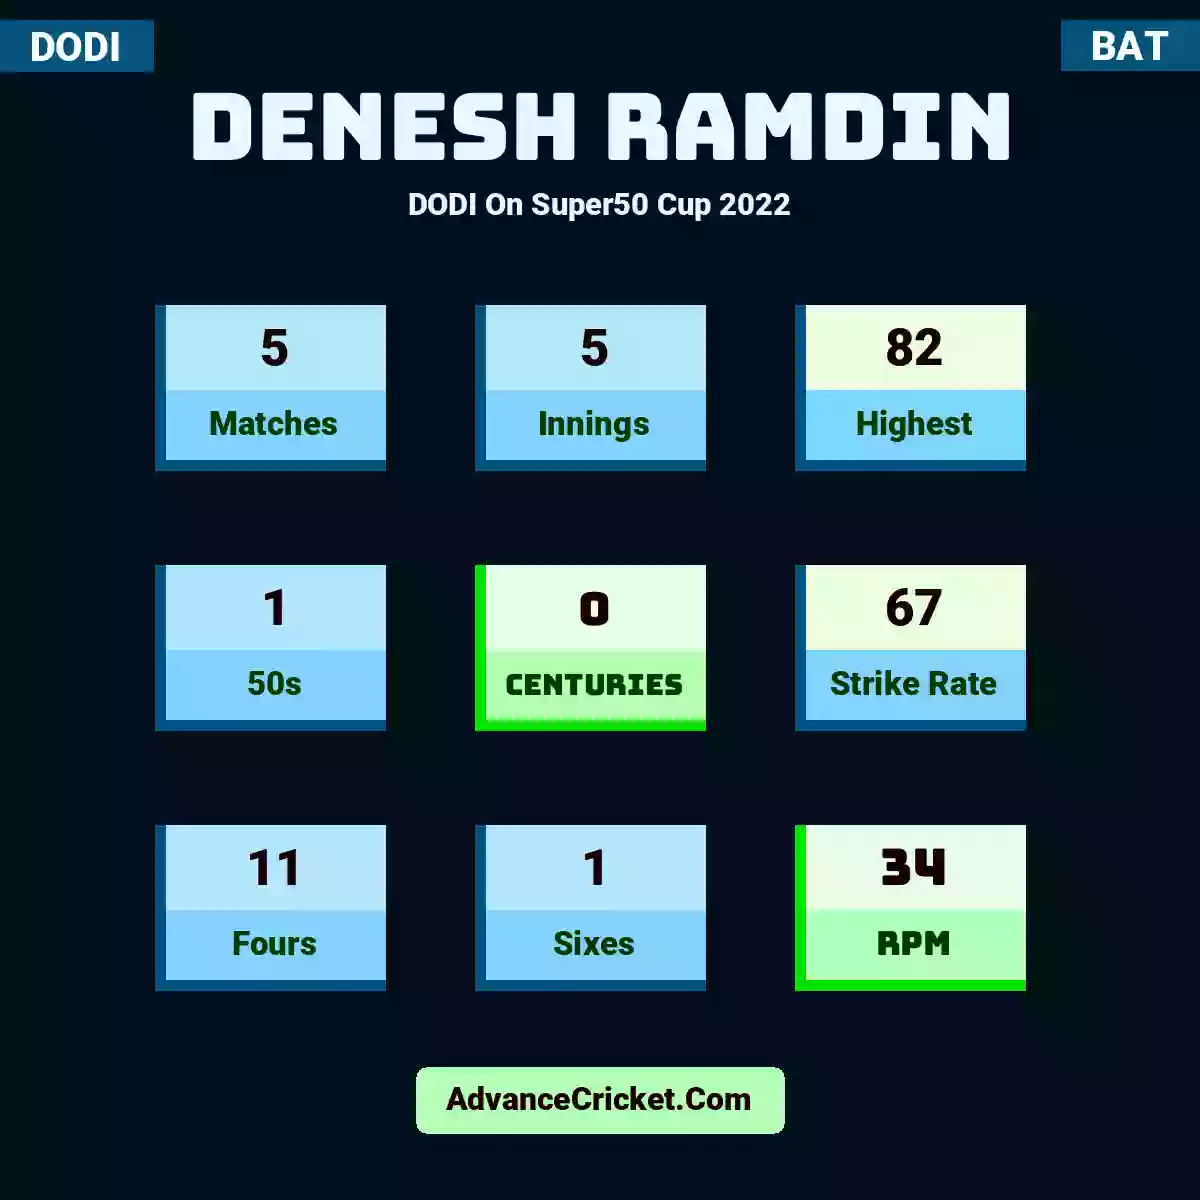 Denesh Ramdin DODI  On Super50 Cup 2022, Denesh Ramdin played 5 matches, scored 82 runs as highest, 1 half-centuries, and 0 centuries, with a strike rate of 67. D.Ramdin hit 11 fours and 1 sixes, with an RPM of 34.